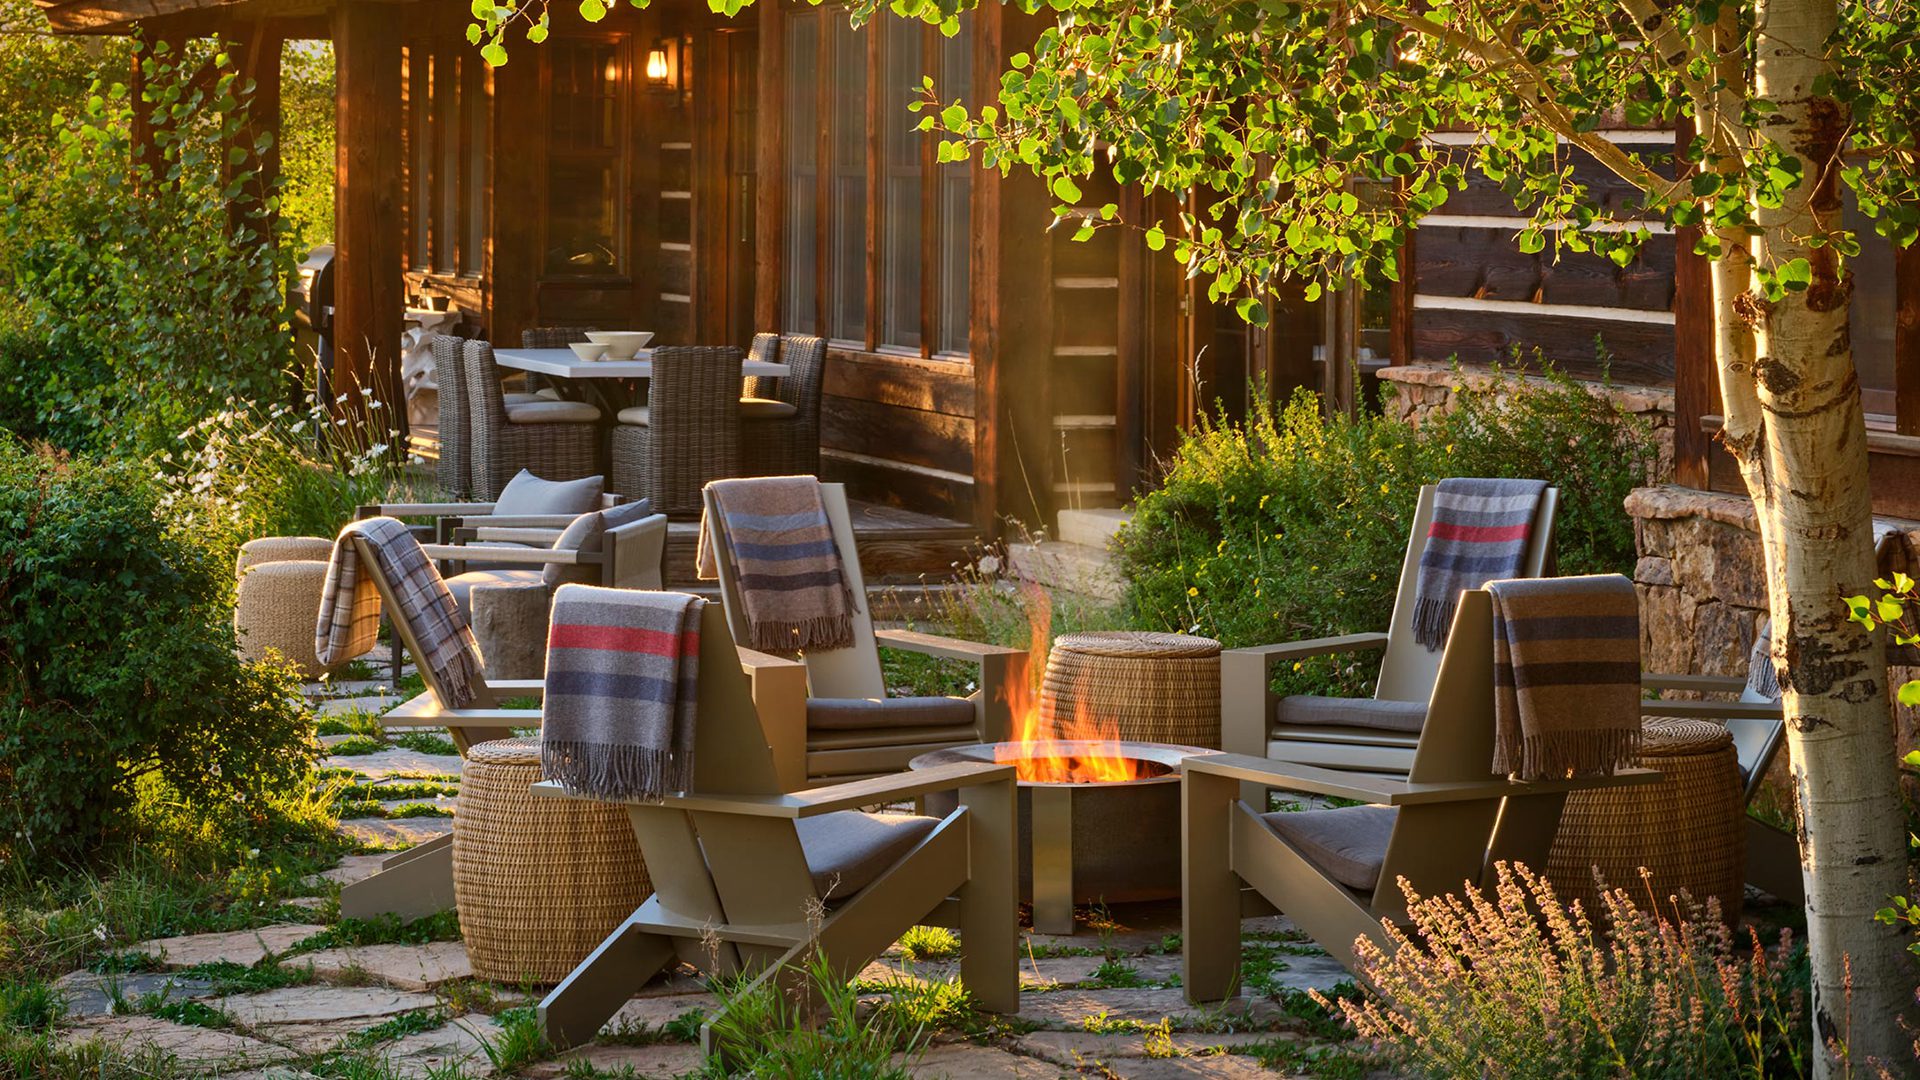 Cozy outdoor patio with fire pit and modern Adirondack chairs